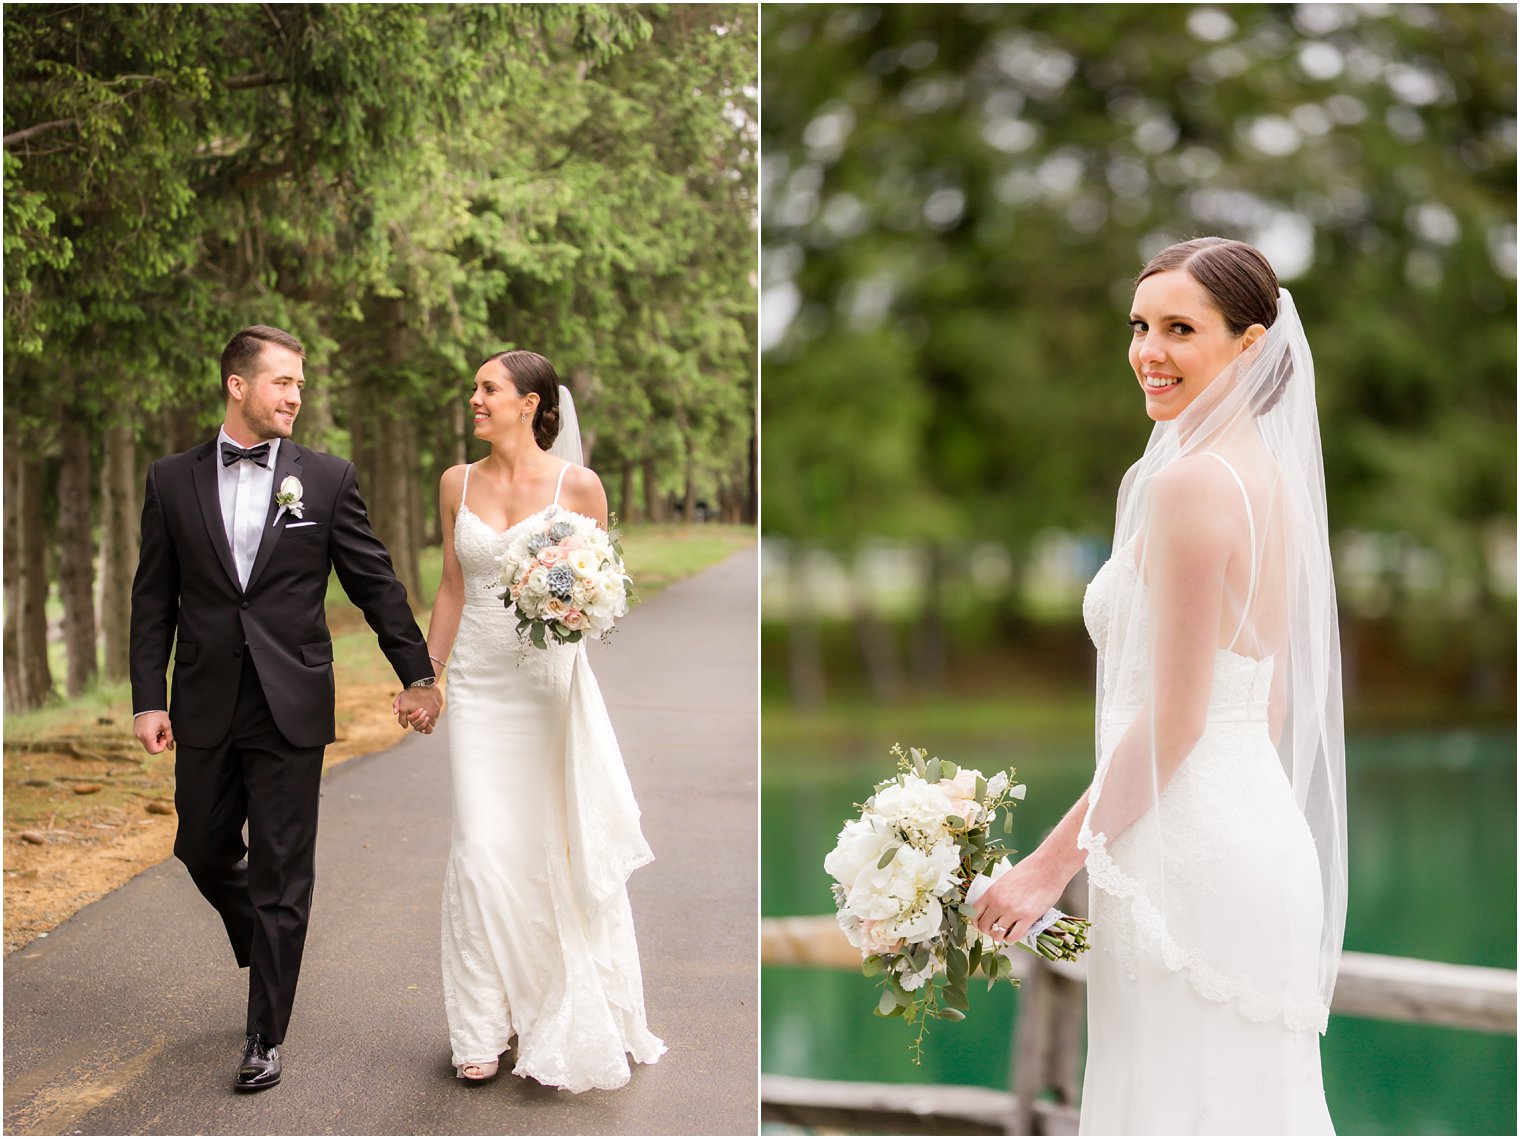 Spring wedding at Windows on the Water at Frogbridge | Photos by Idalia Photography